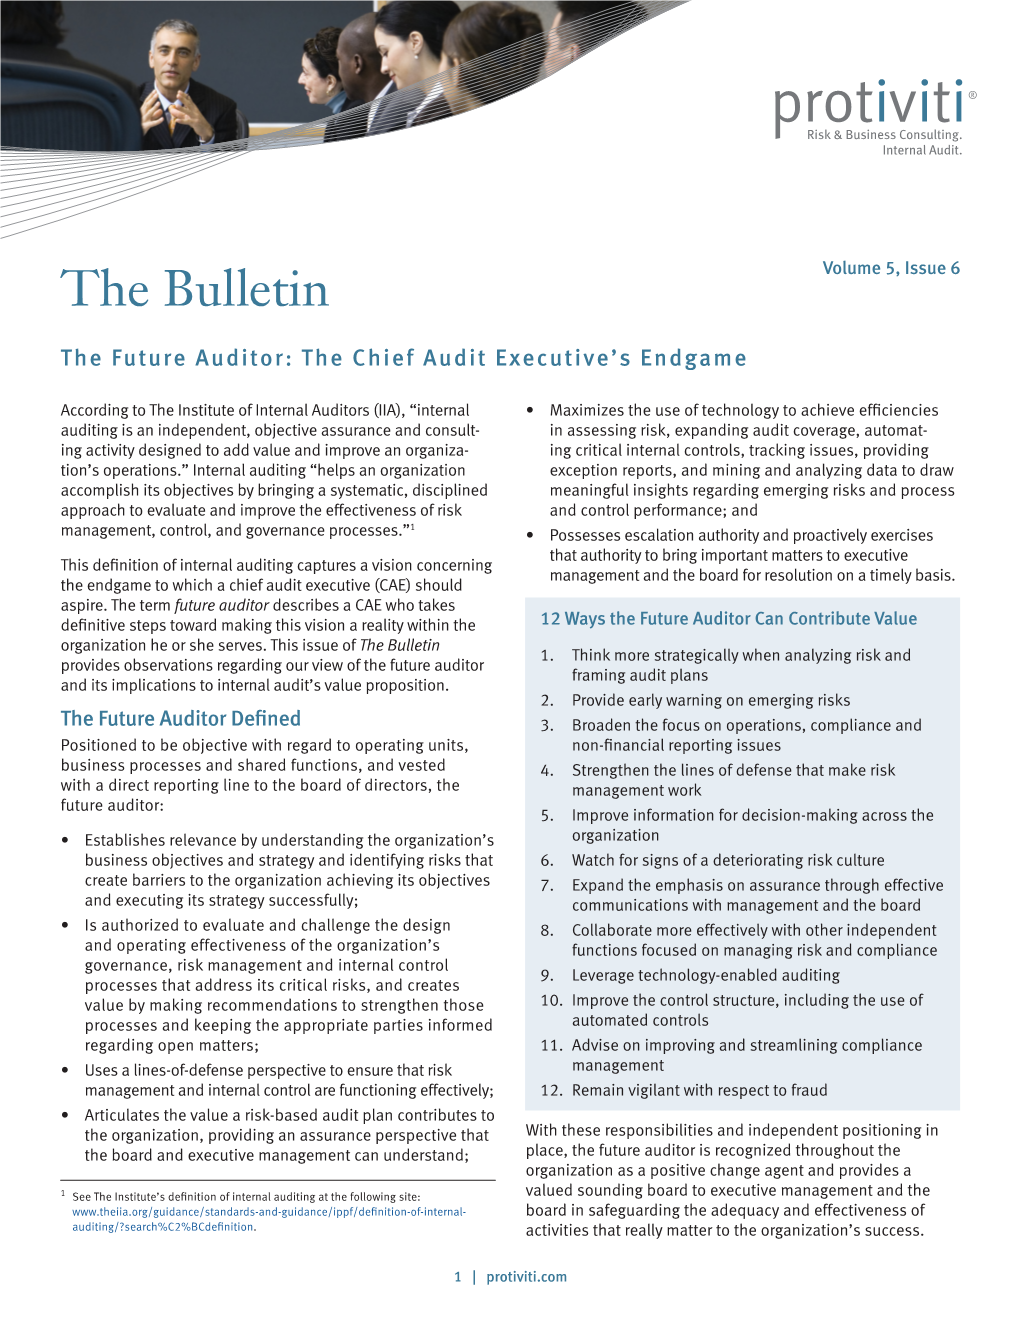 The Future Auditor: the Chief Audit Executive's Endgame